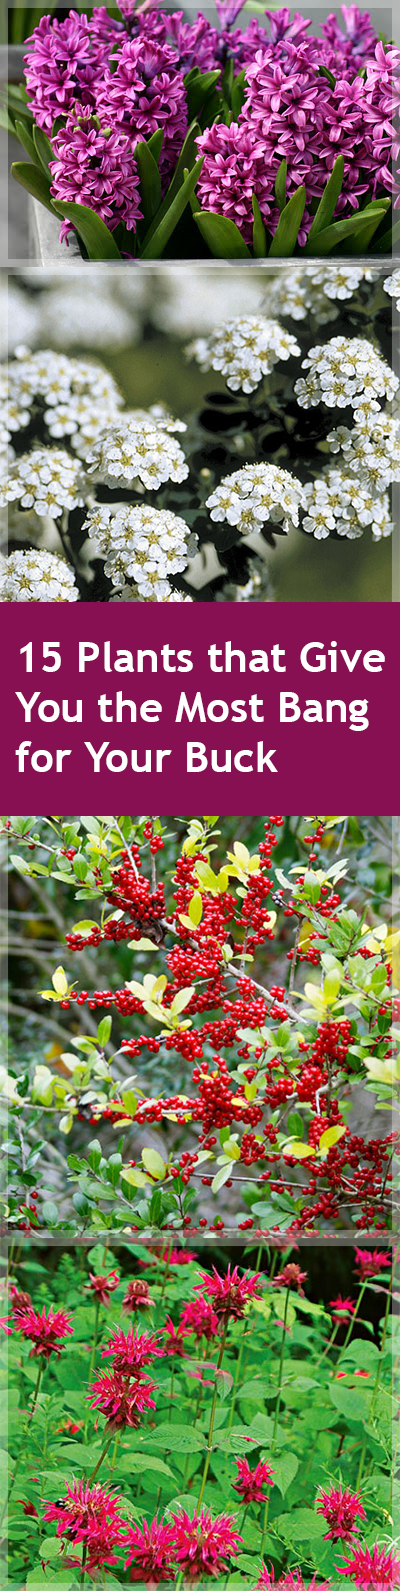 15 Plants That Give You the Most Bang for Your Buck| Cheap Garden Ideas, Inexpensive Garden Ideas, Inexpensive Gardening, Garden Ideas, Garden Design, Backyard Garden, Flower Garden, Gardening for Beginners, Flower Gardening for Beginners #CheapGardenIdeas #InexpensiveGardening #FlowerGarden #GardenIdeas 